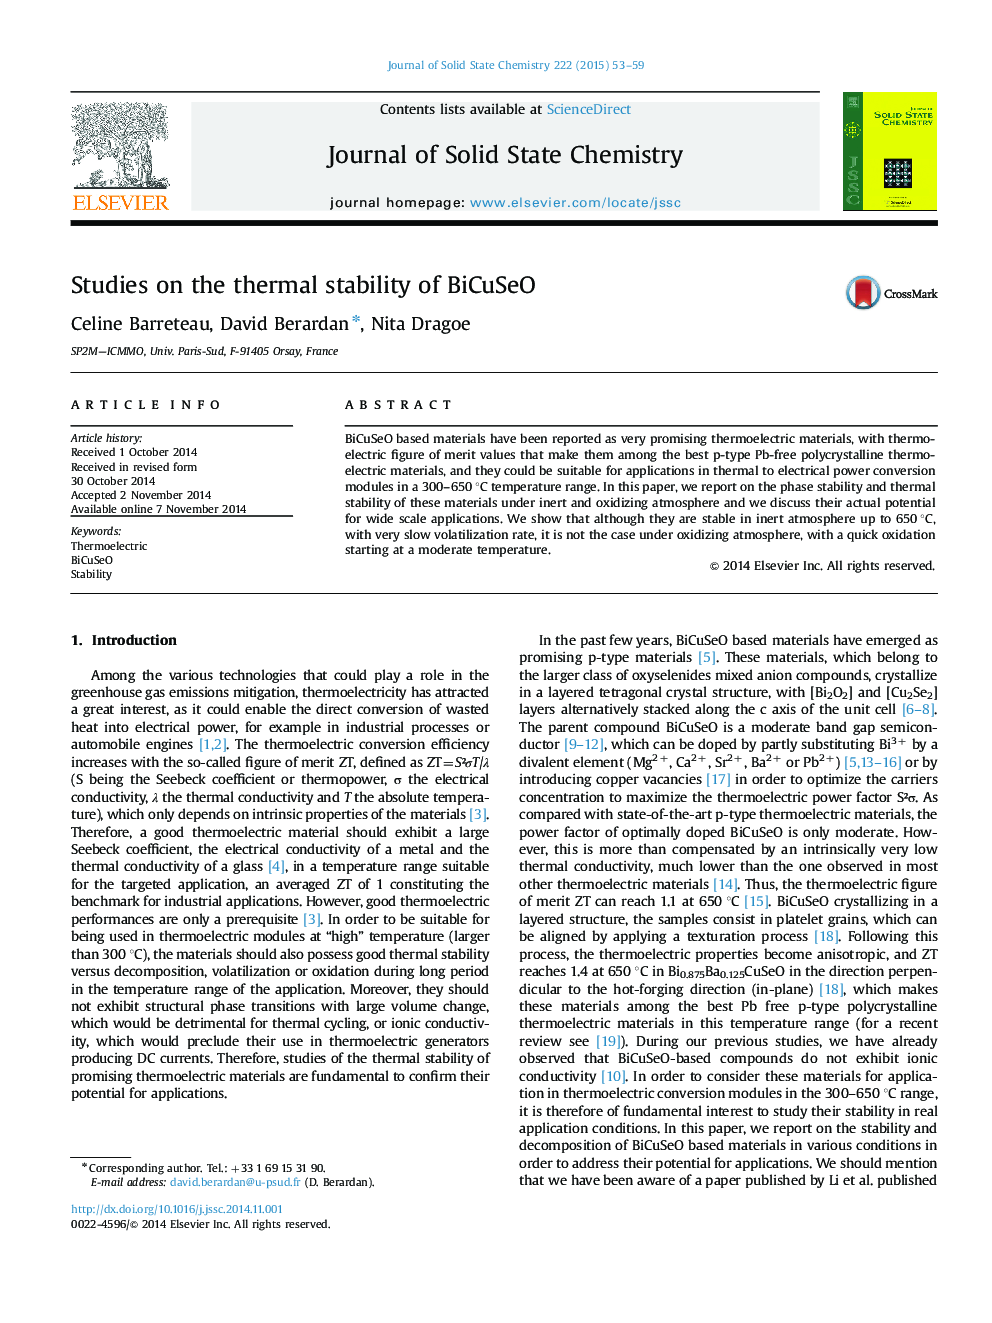 Studies on the thermal stability of BiCuSeO